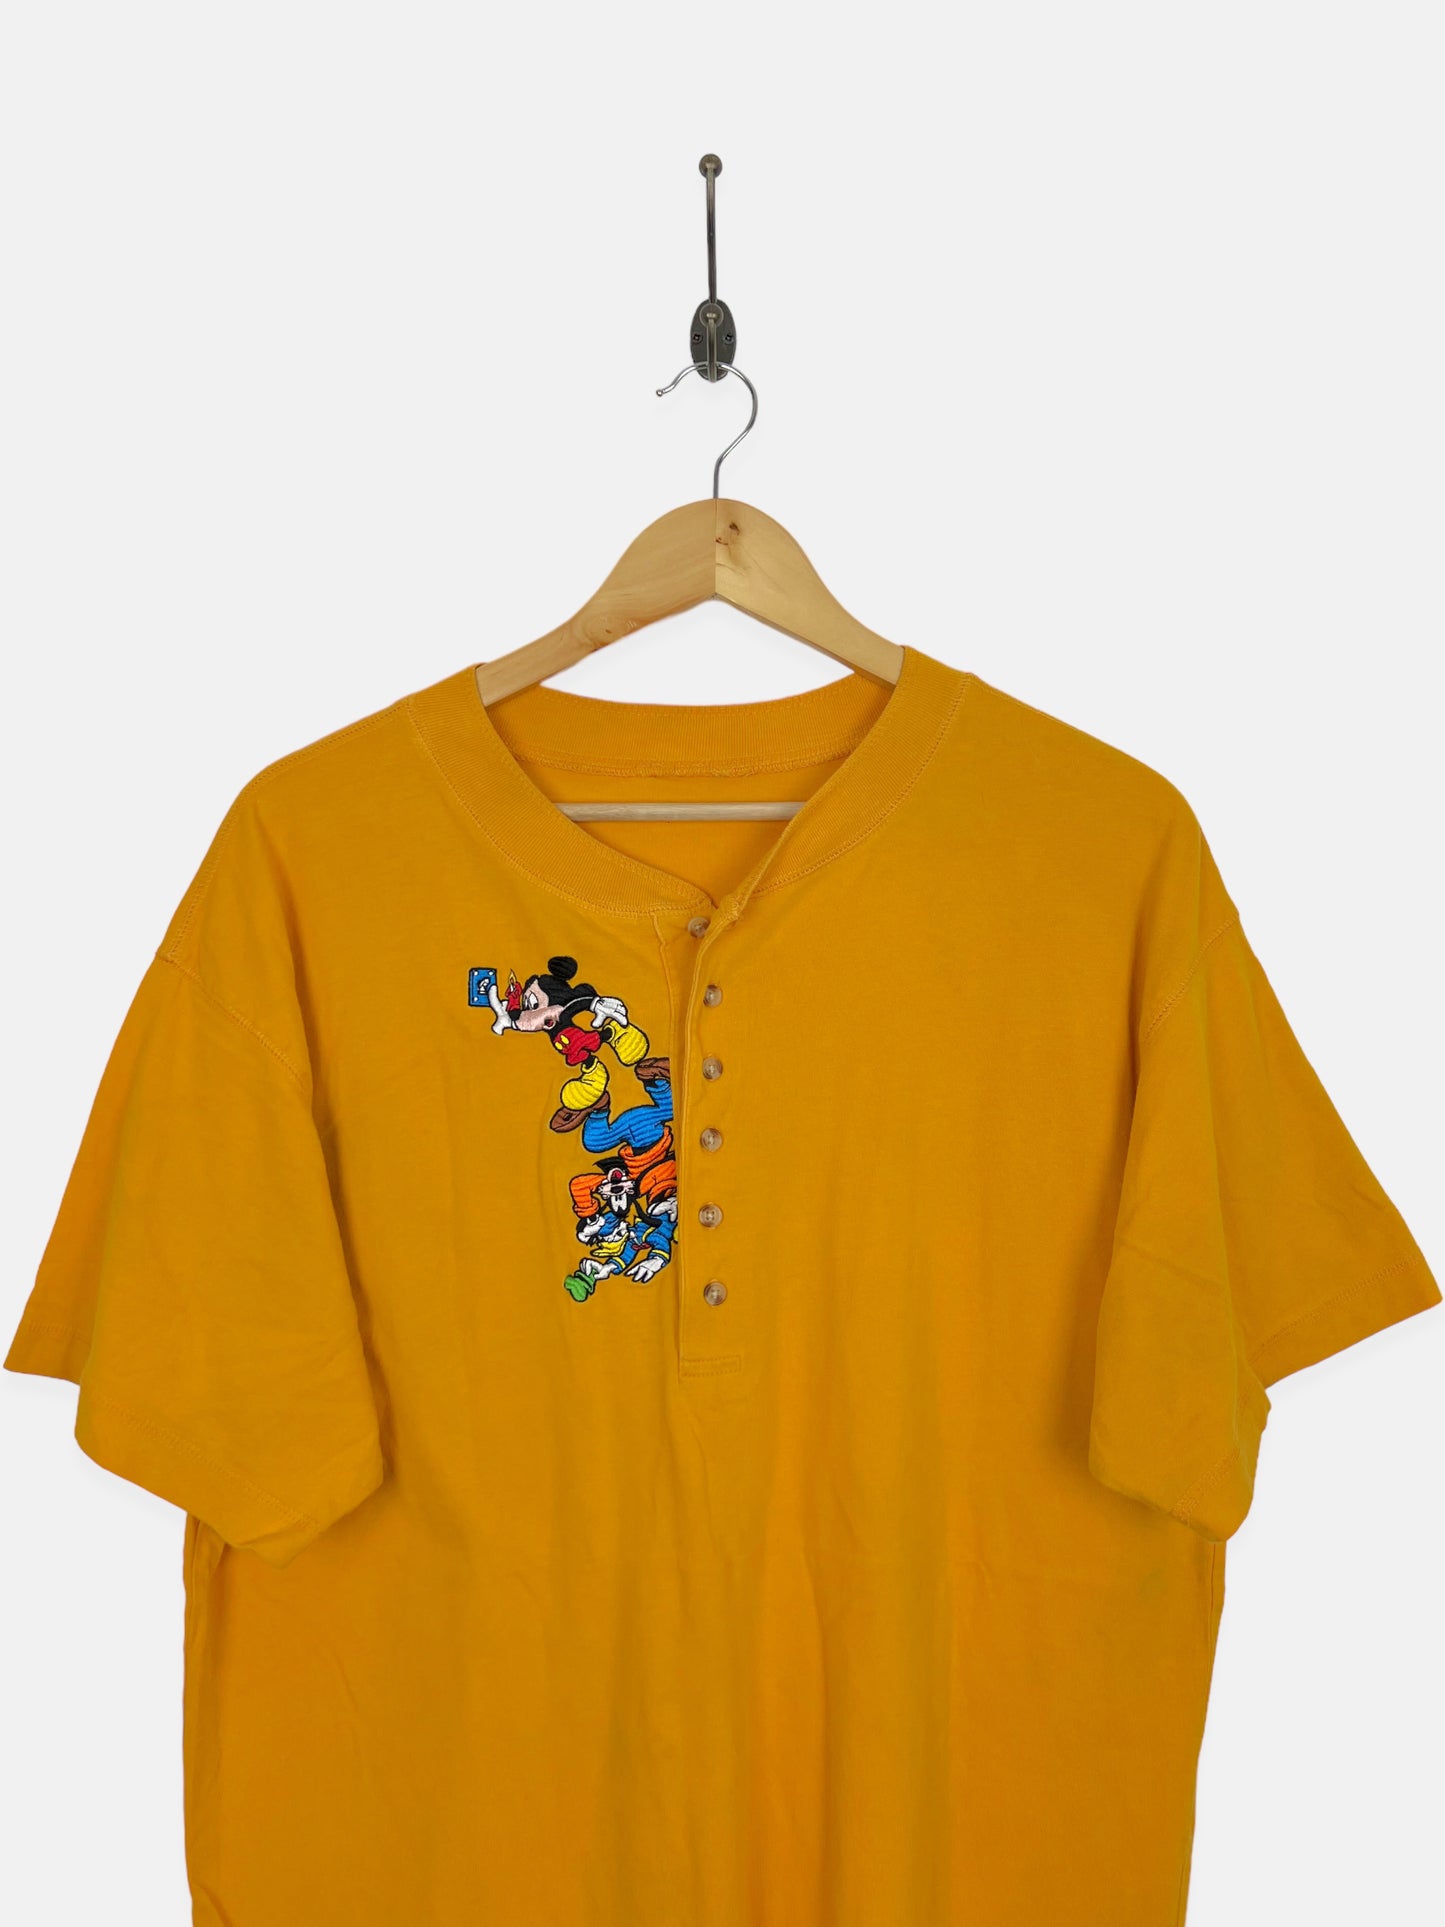 90's Disney Mickey Mouse Embroidered Vintage T-Shirt Size M-L